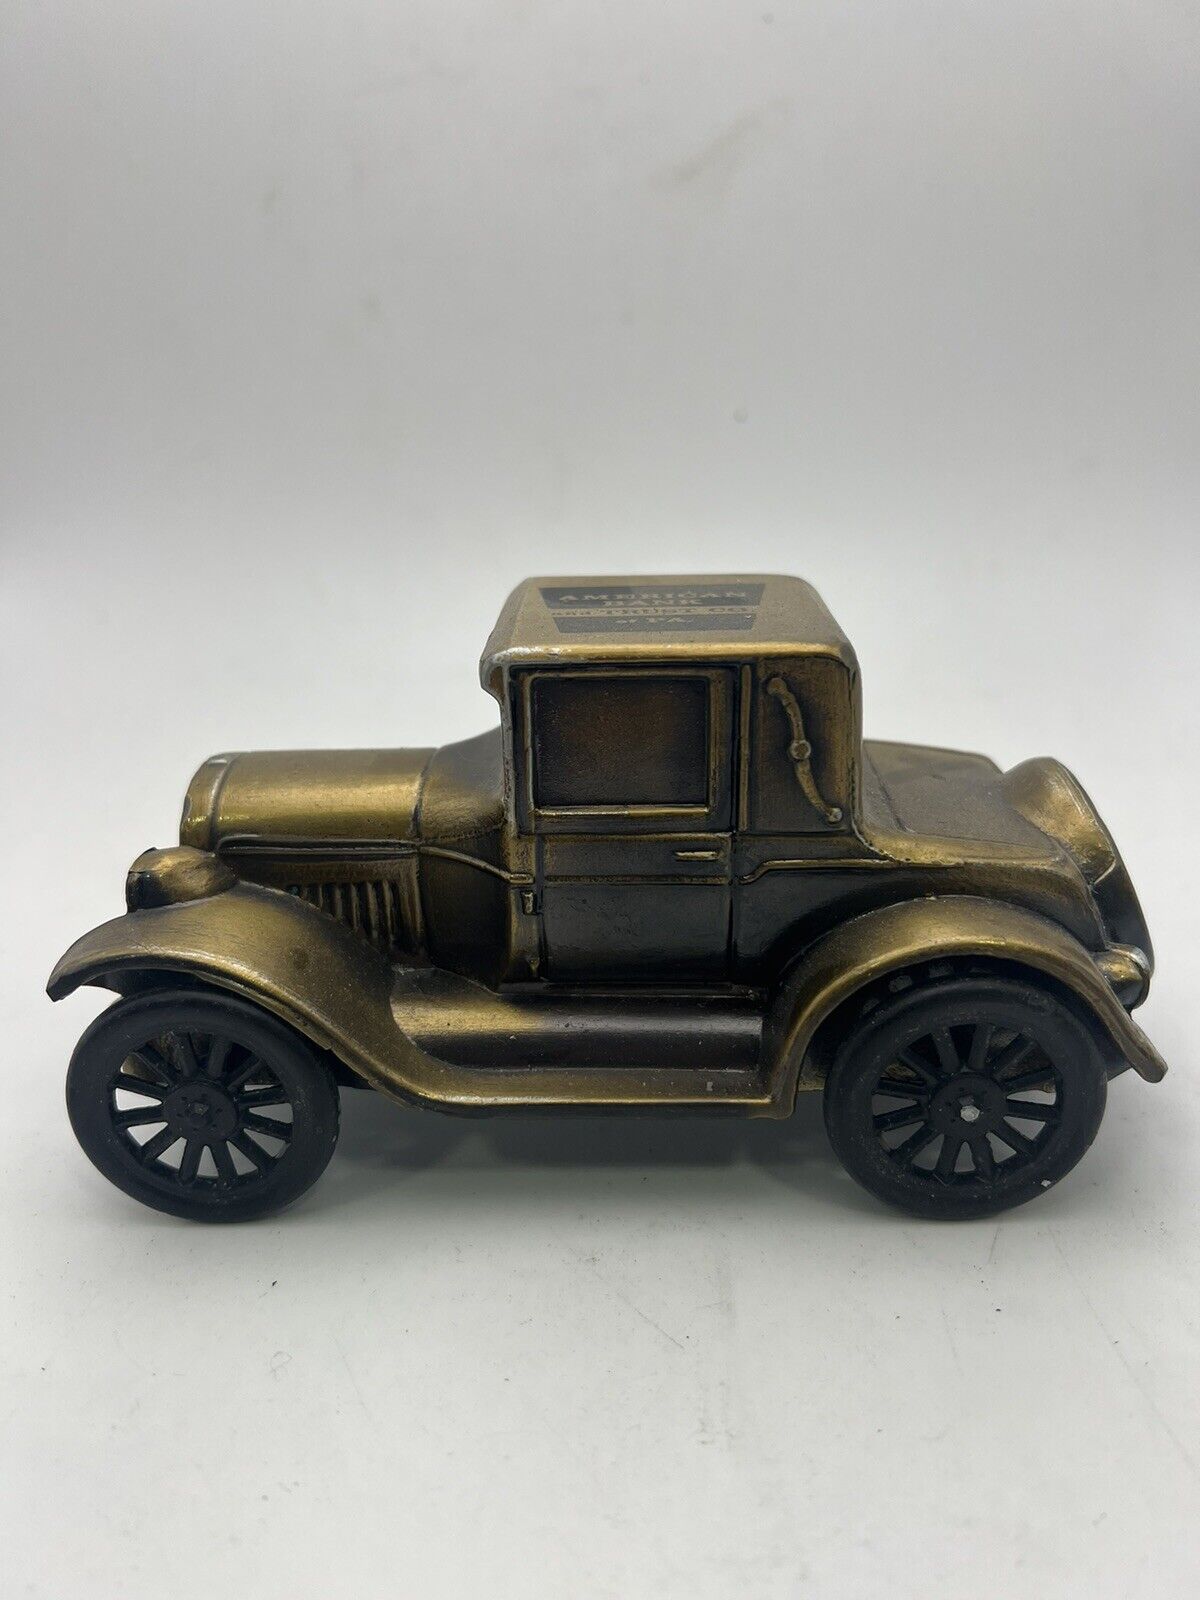 Vintage American Bank And Trust Co. Of Pennsylvania Car Bank